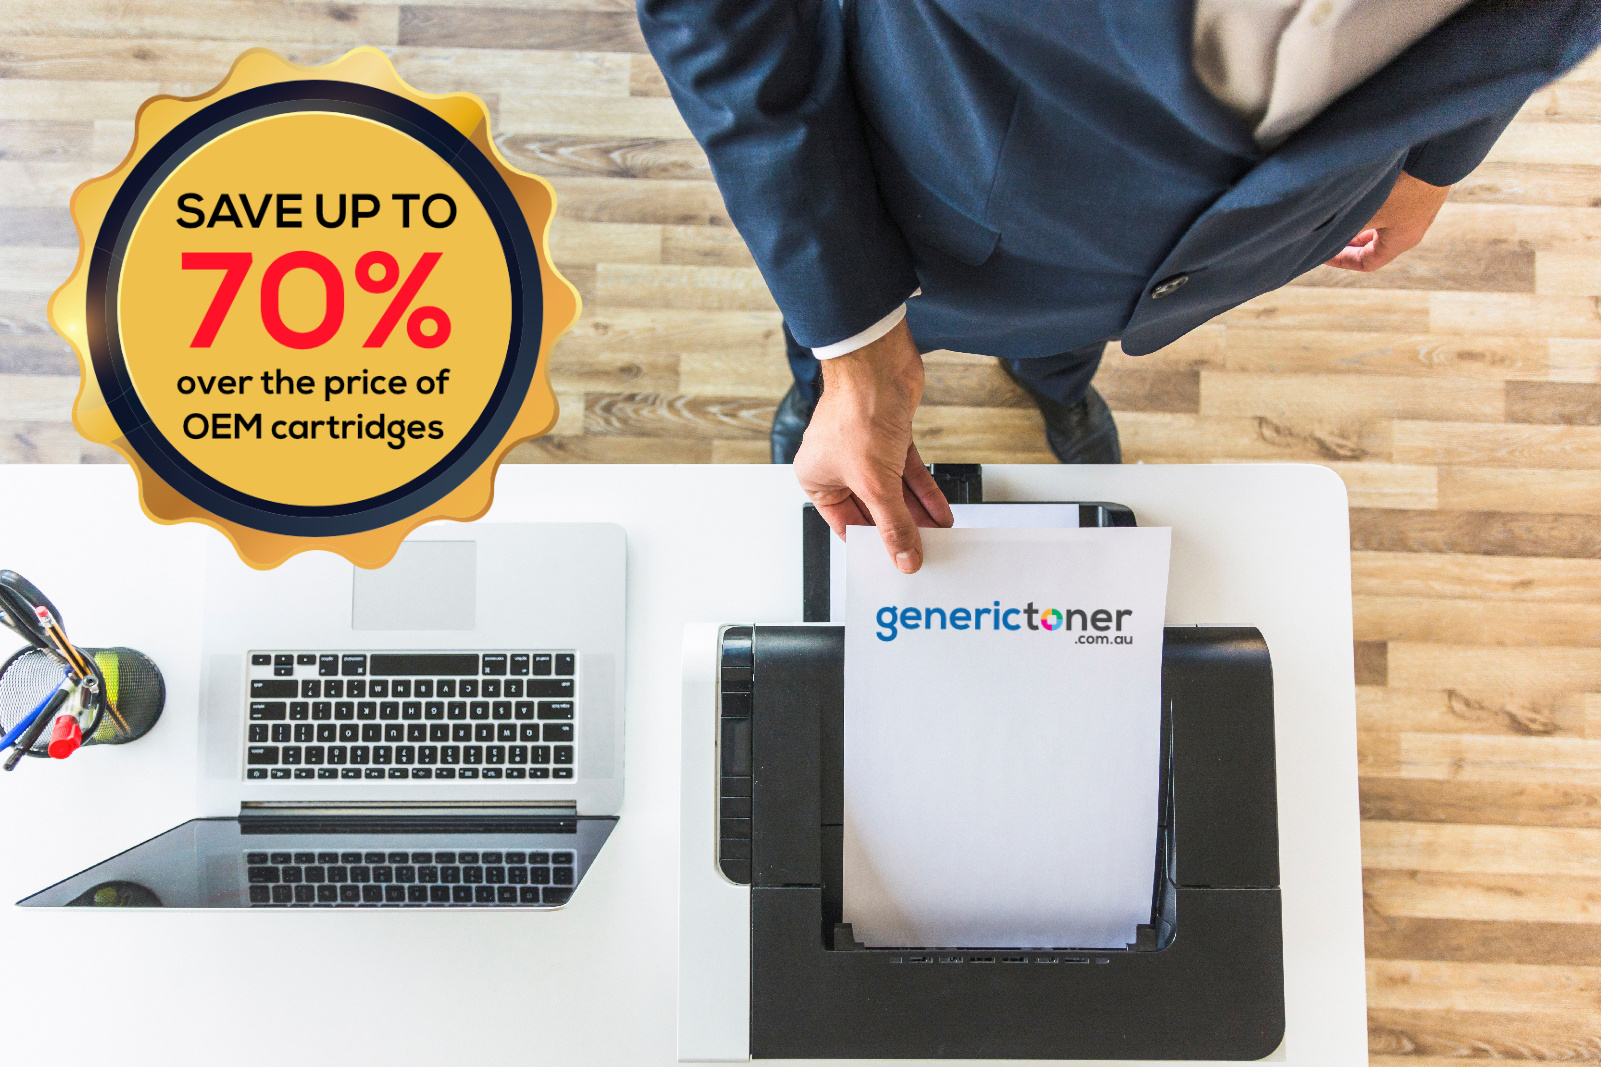 Office printer with save up to 70% using compatible toner cartridge